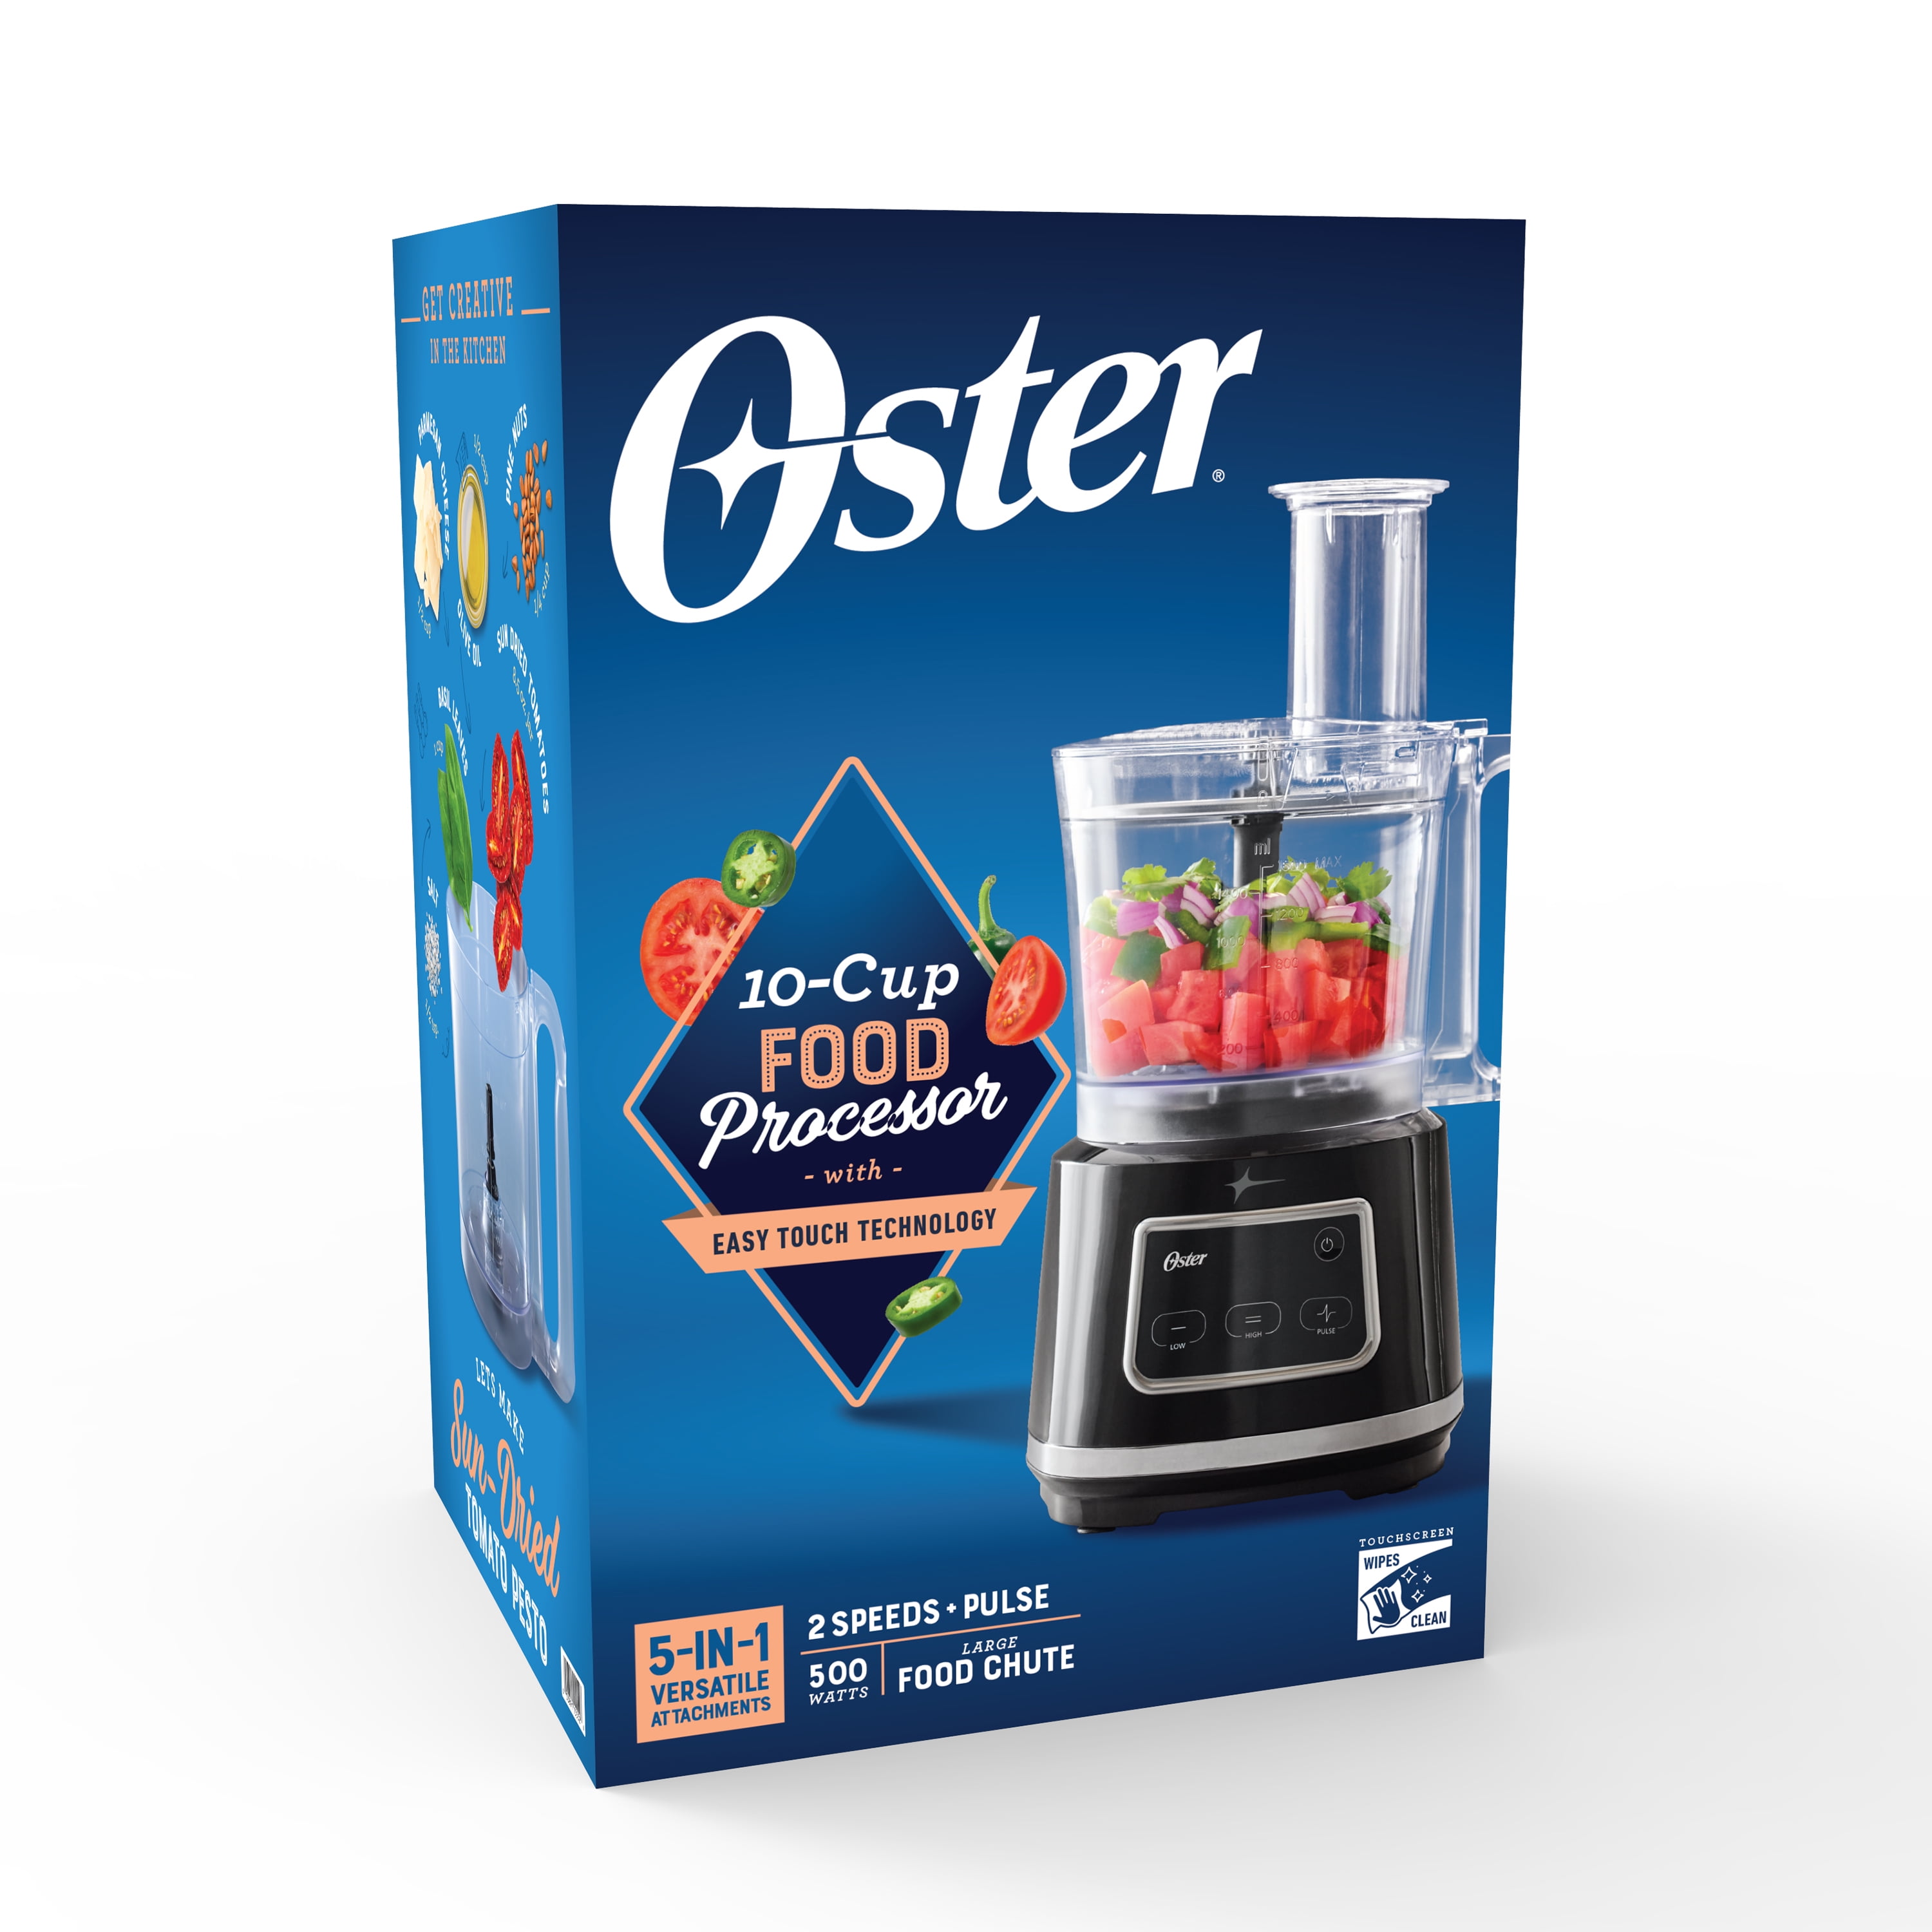 Oster 10 Cup Food Processor full review 2023 - BEST Food Processor